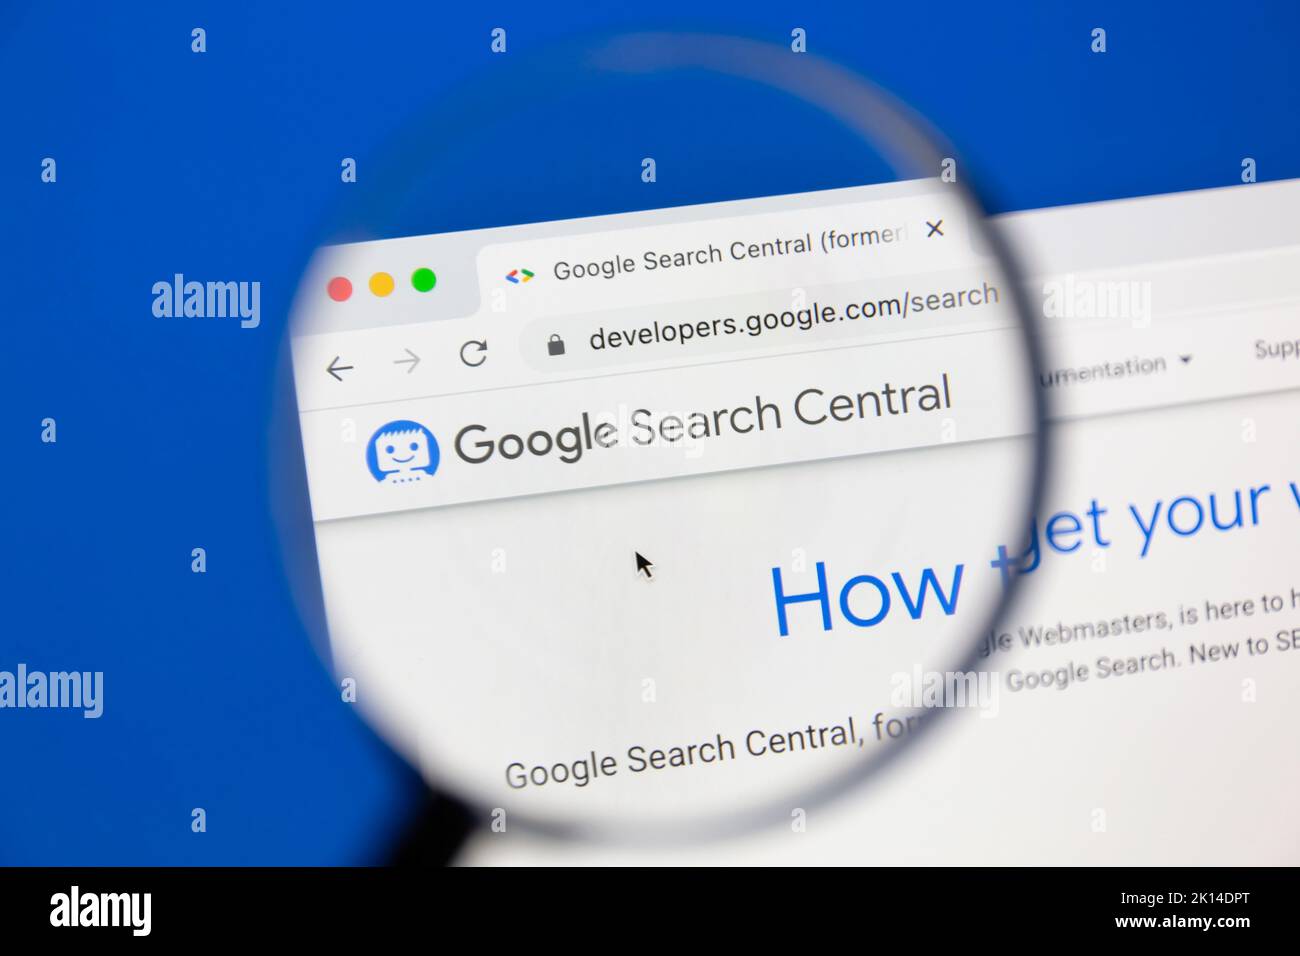 Ostersund, Sweden - June 20, 2022: Google Search Central website. Google Search Central is formerly Google Webmasters. Stock Photo